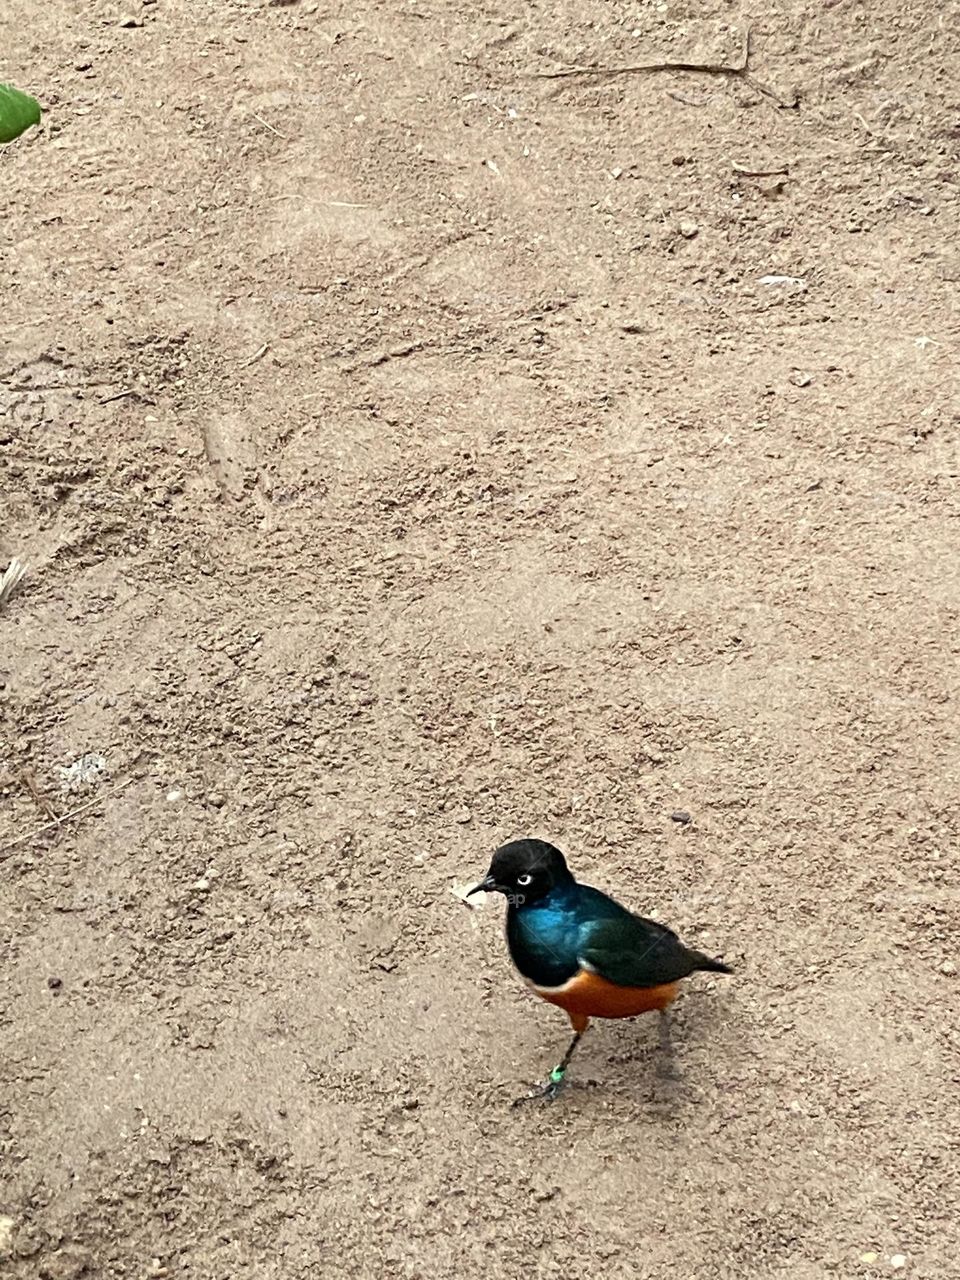 A blue and tan bird making its way across a dirt field with  a prized piece of food in its beak. 